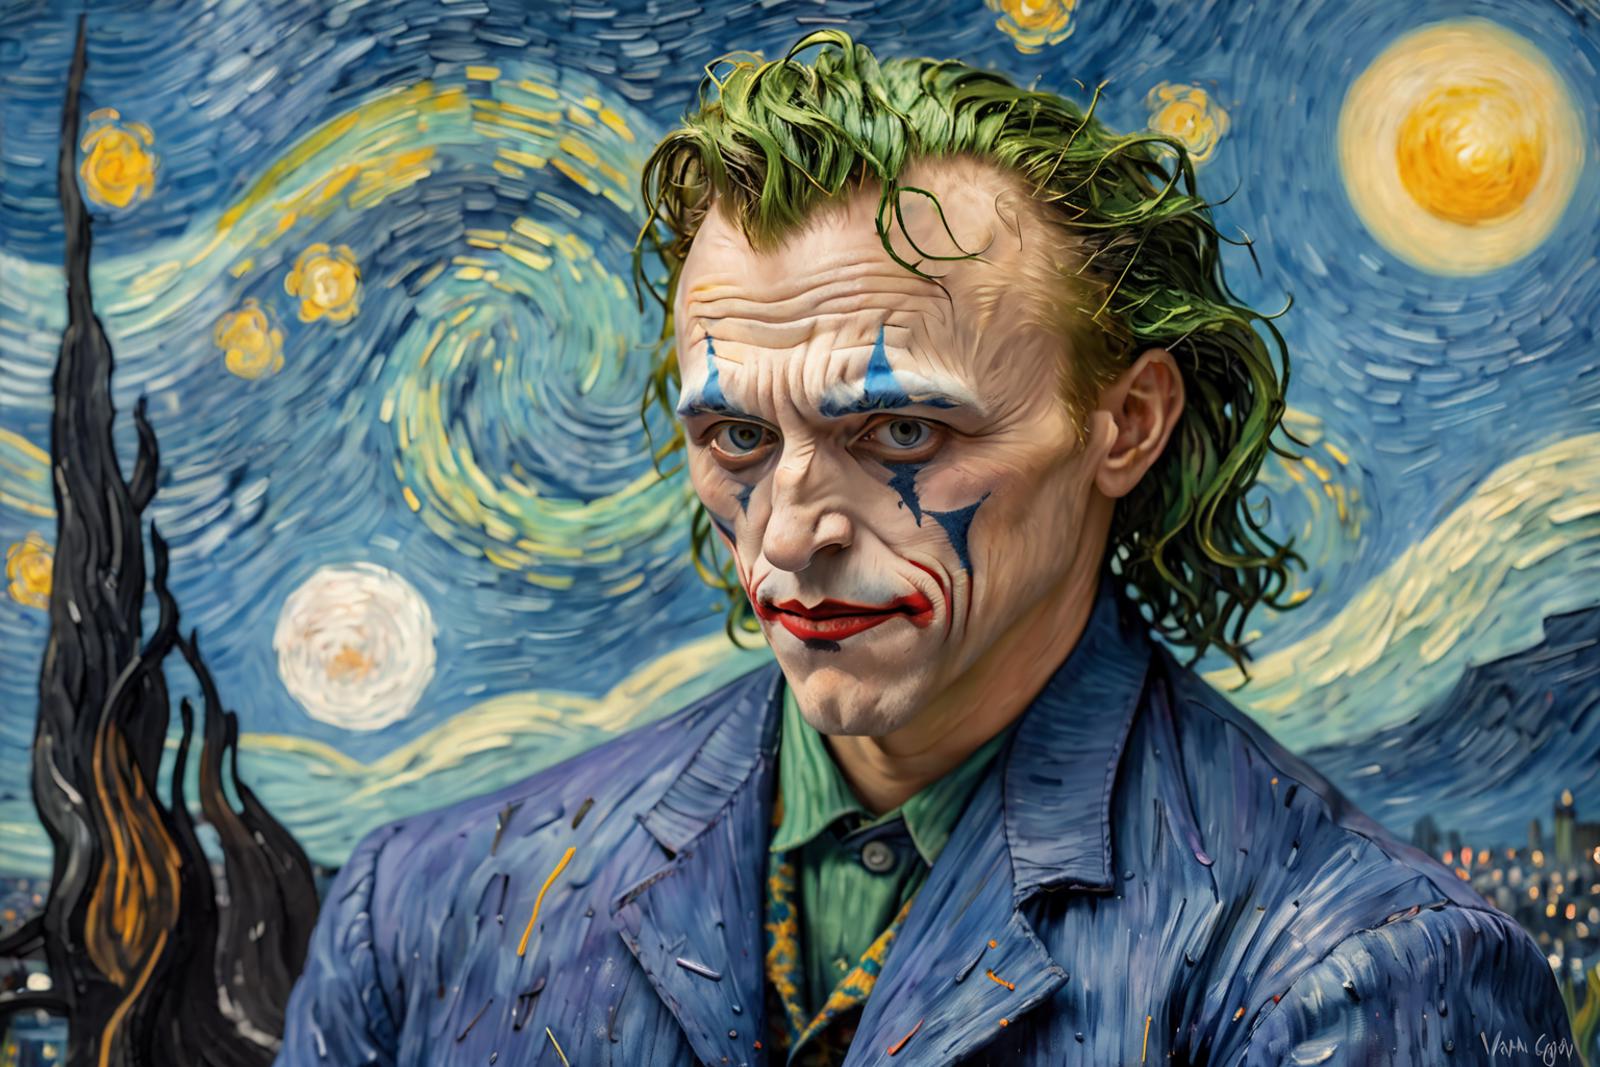 A painting of the Joker from Batman with a blue jacket and a green tie.